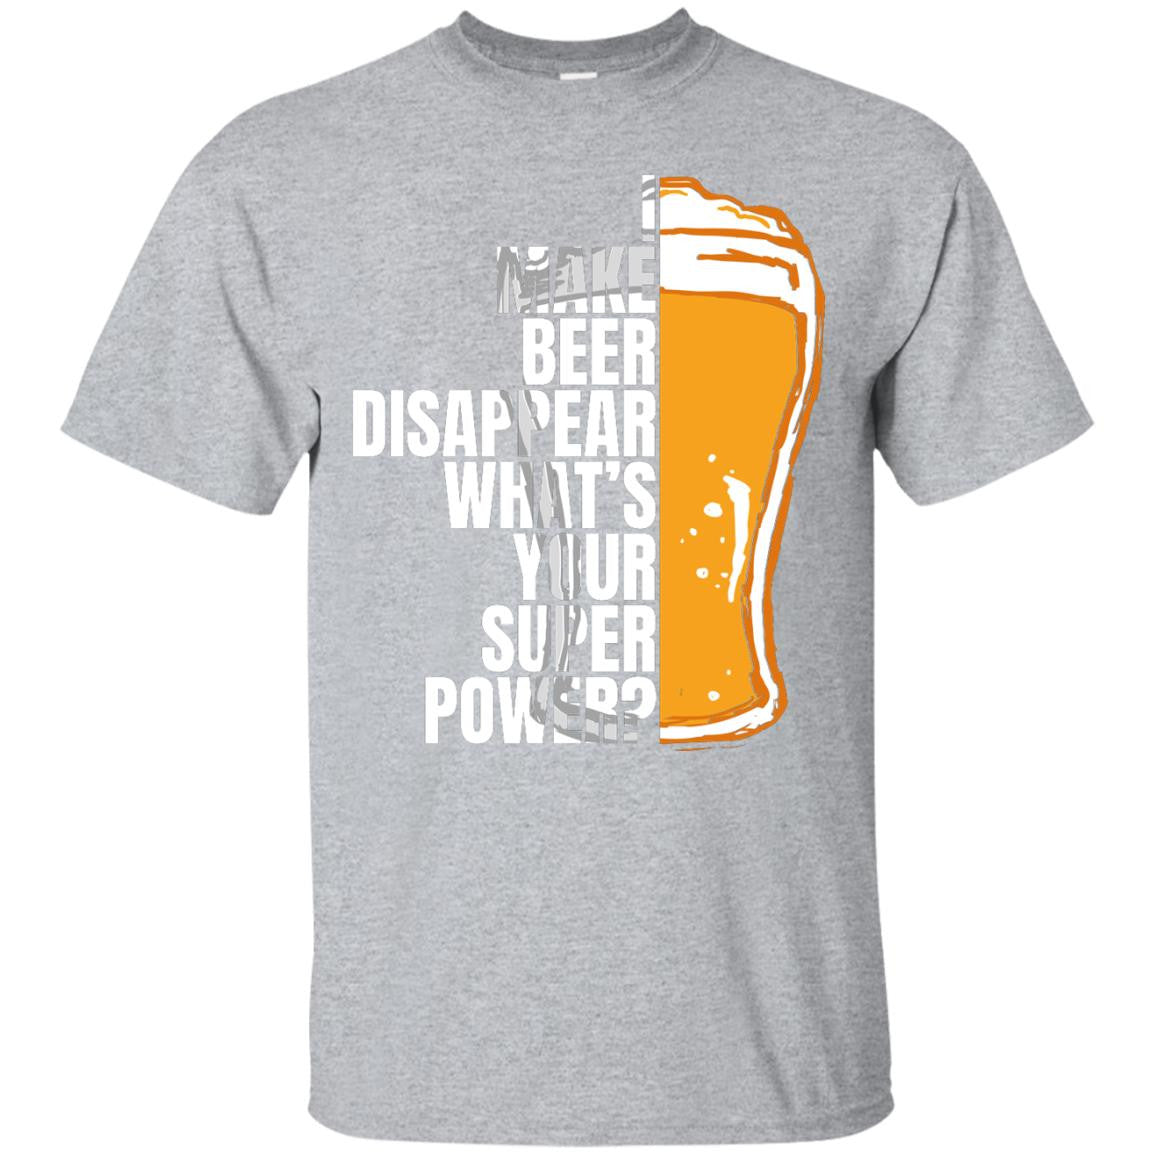 I Make Beer Disappear What's Your Super Power? T-Shirt Apparel - The Beer Lodge